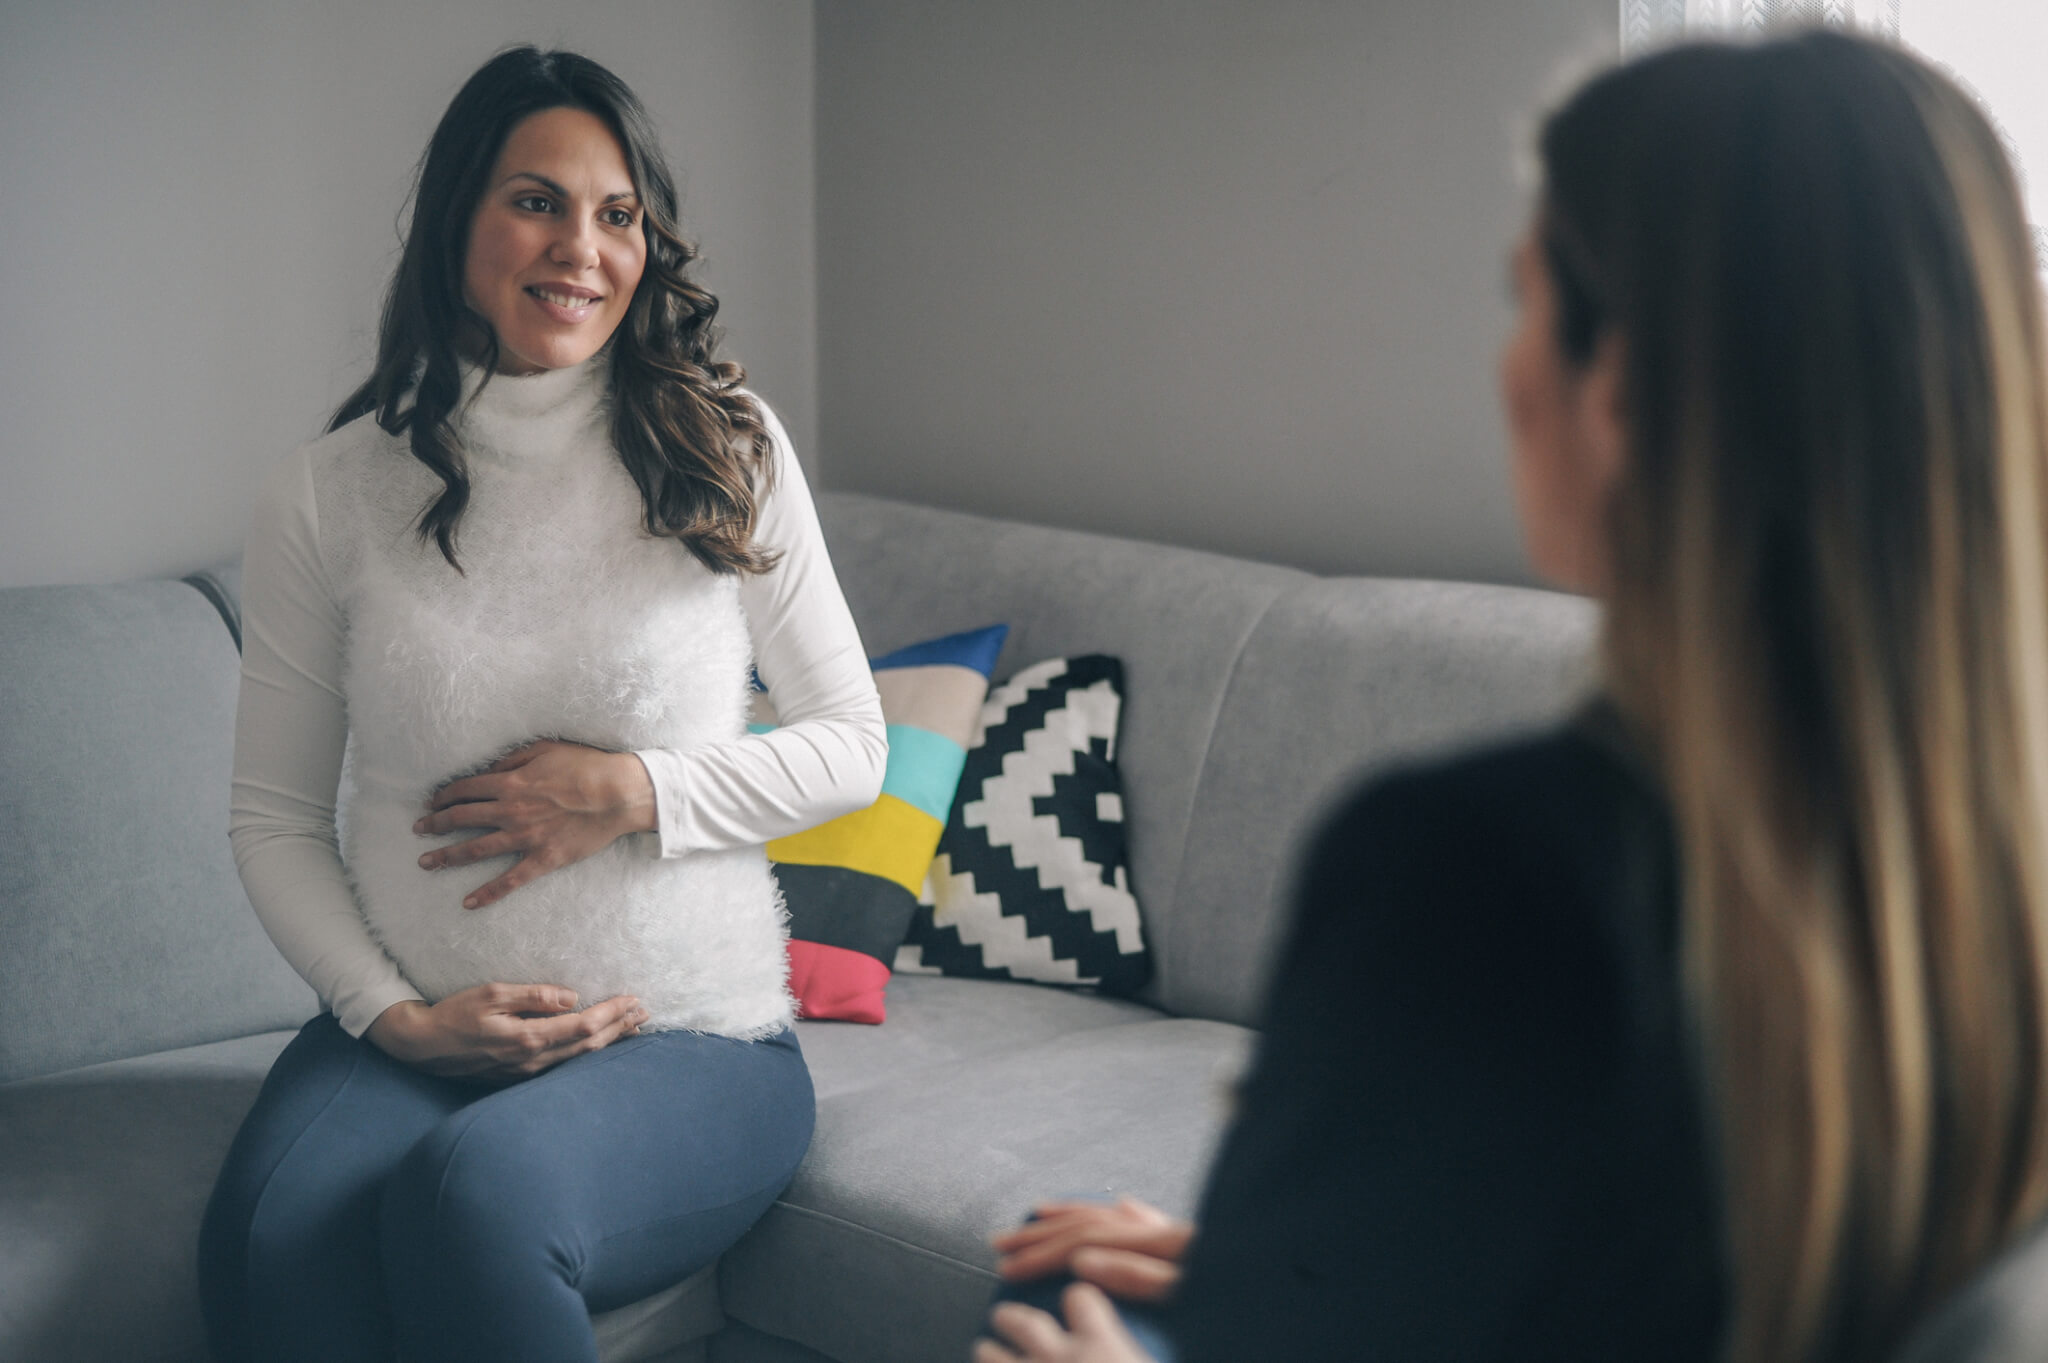 Pregnant woman on counseling appointment